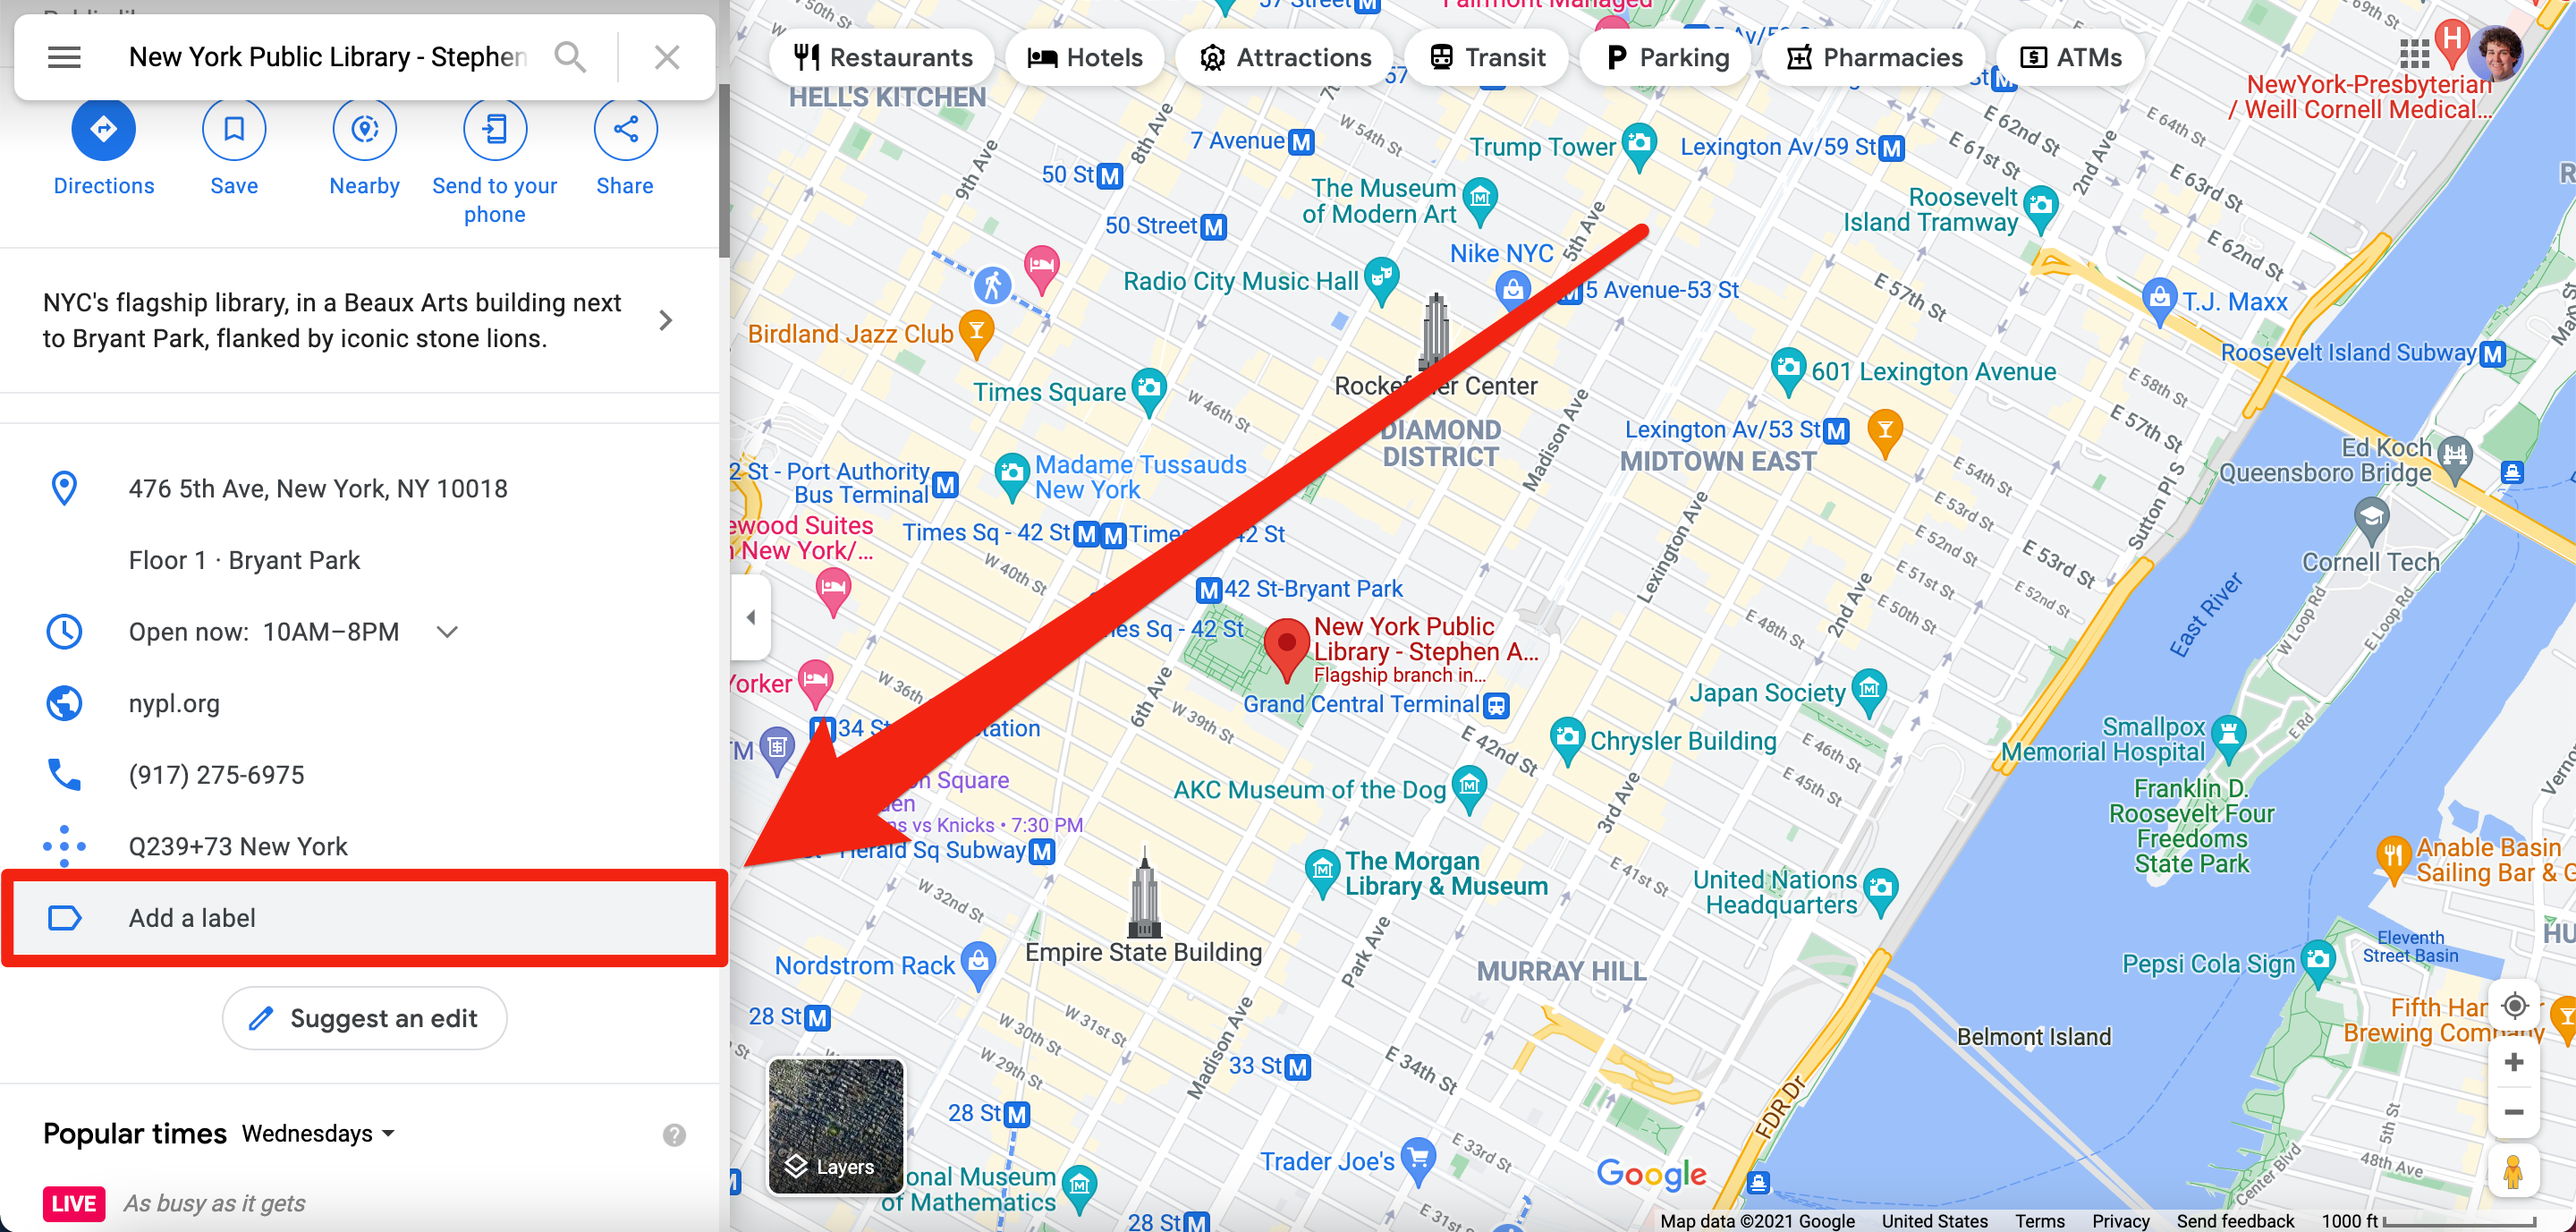 A screenshot from the Google Maps website, showing the "Add a label" option when you select a location.